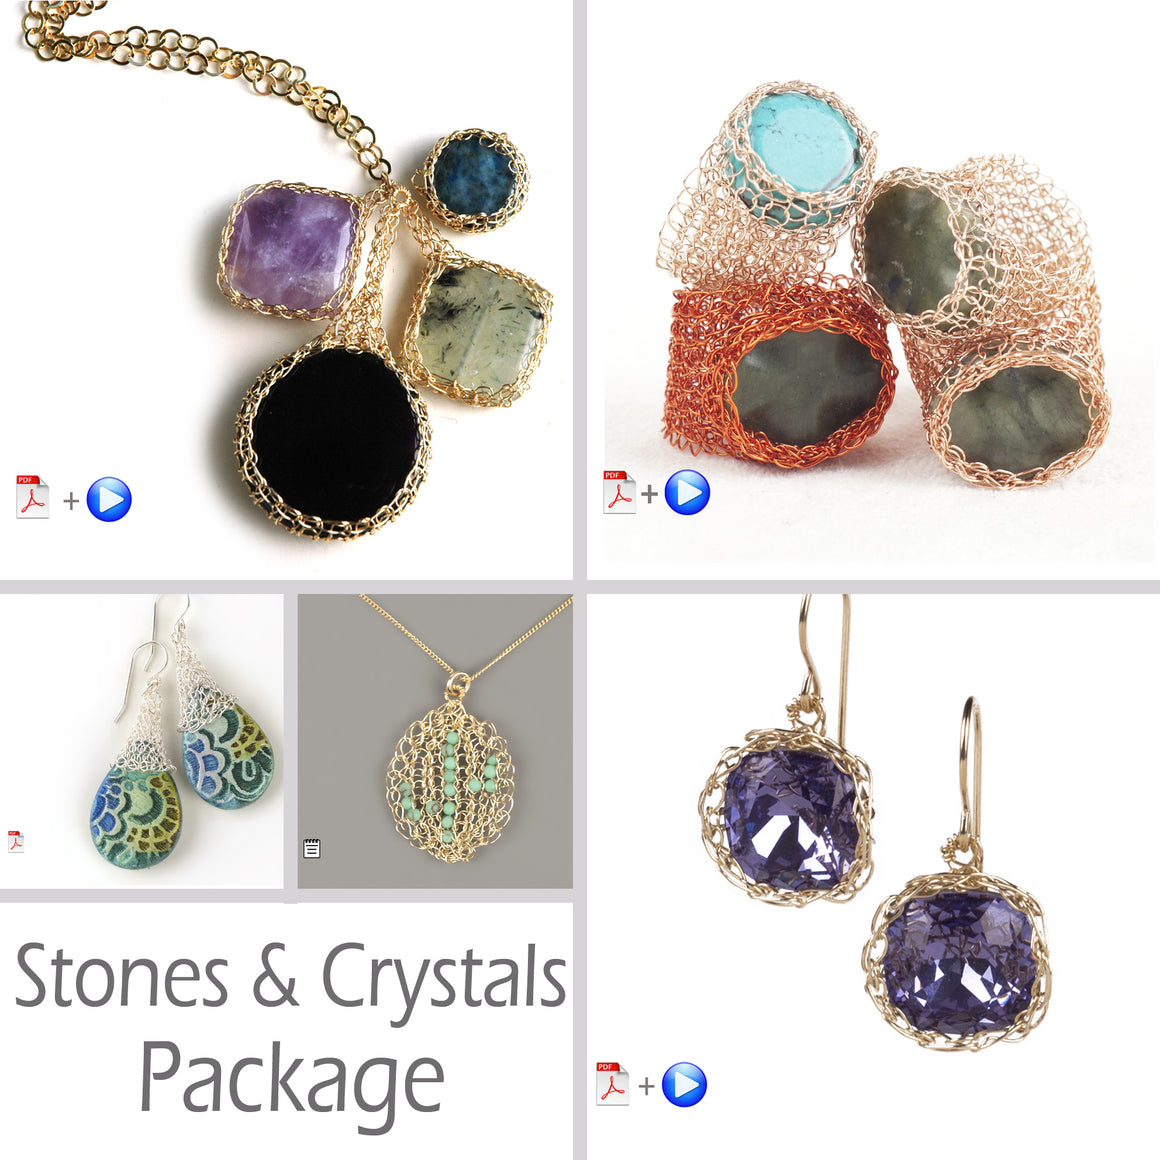 How to crochet stones and crystals tutorials - Yooladesign